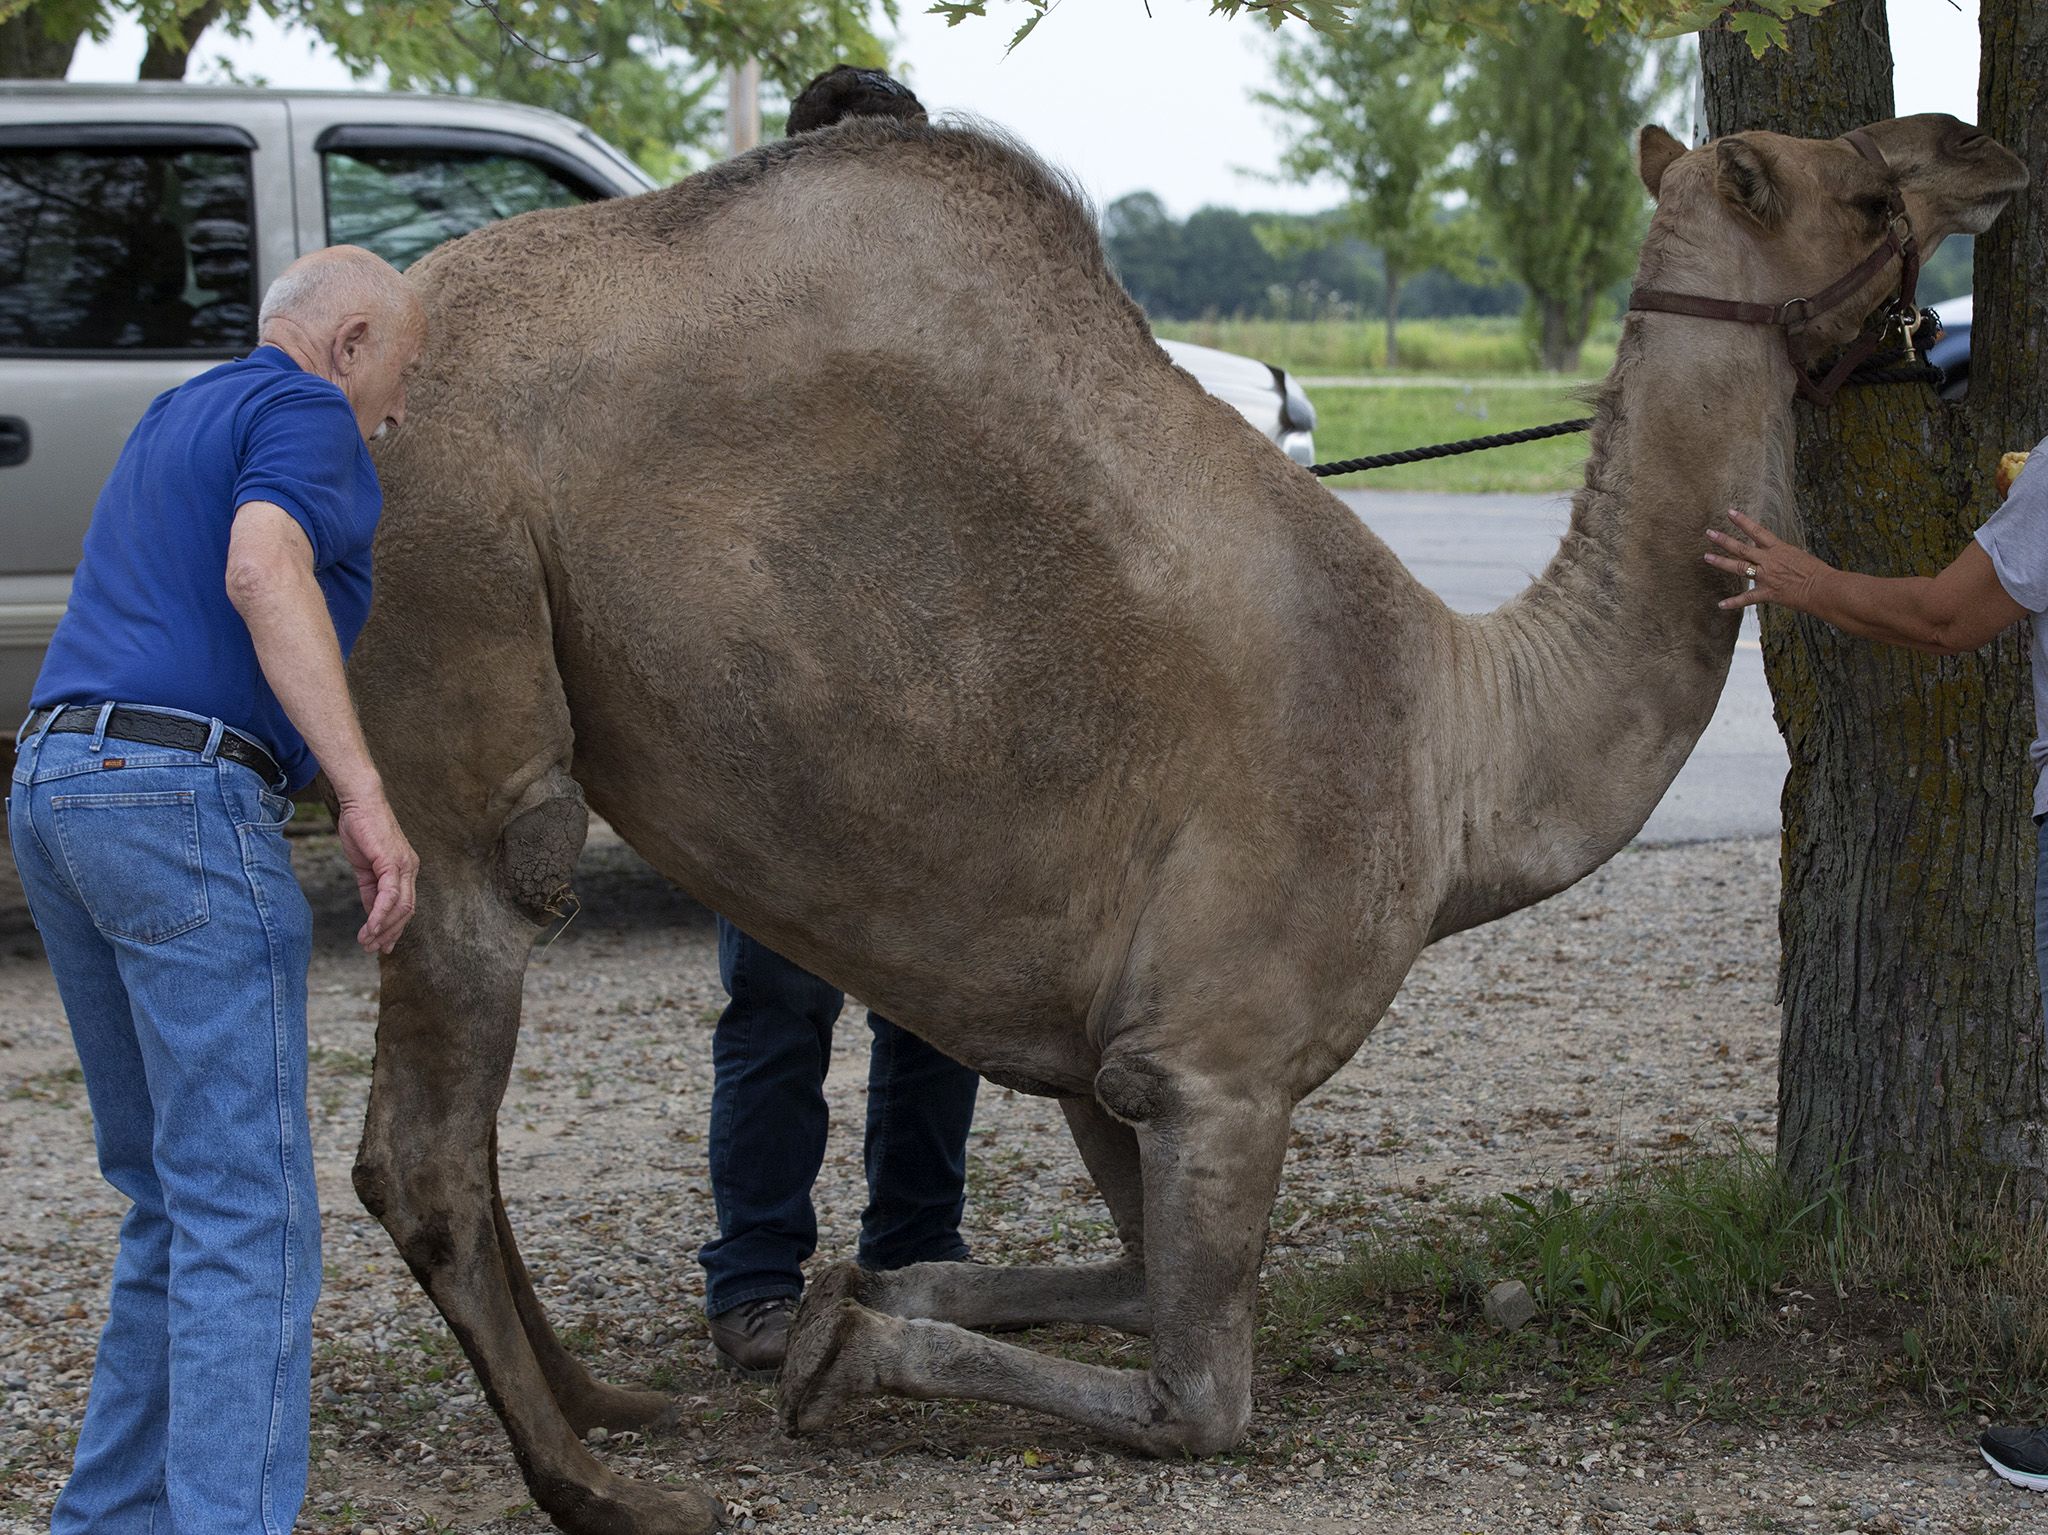 Dr. Pol checks camel for pregnancy with the help of Peggy. This image is from The Incredible Dr Pol. [Photo of the day - September 2019]